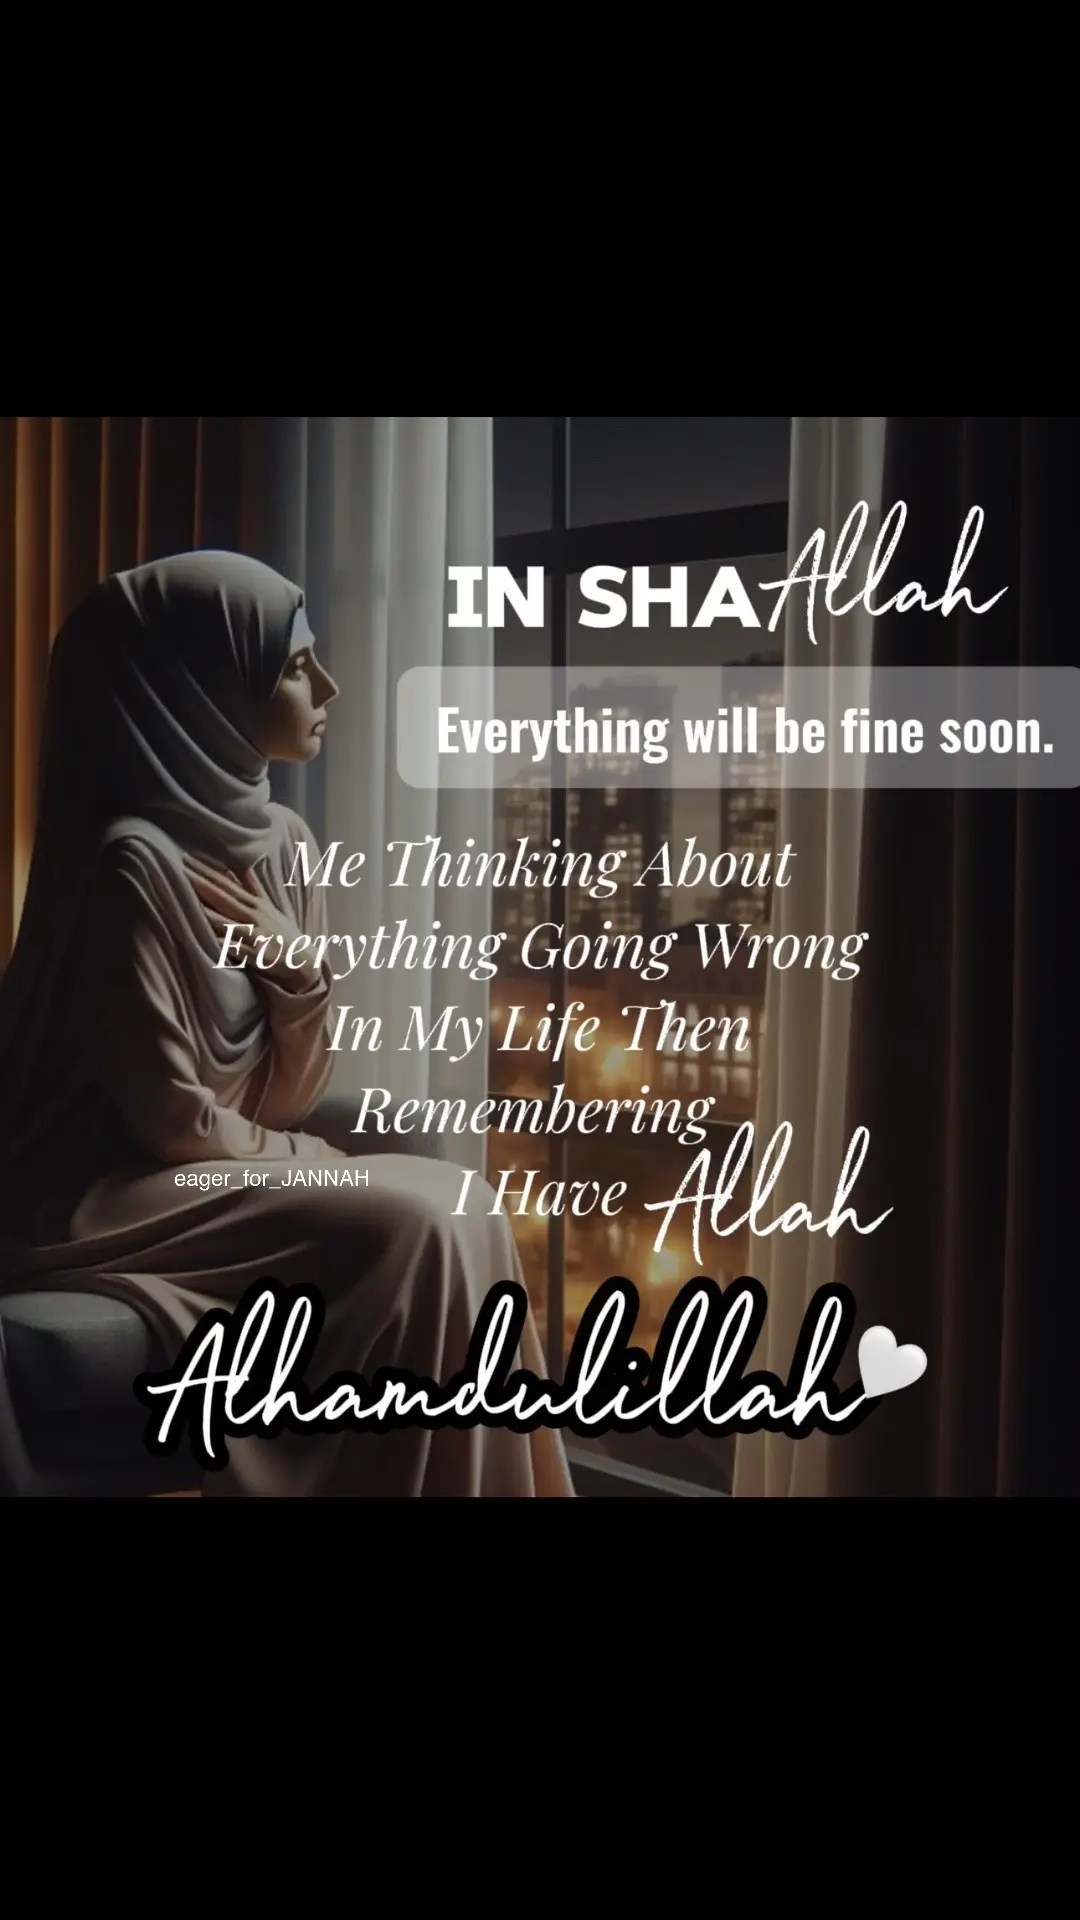 Me Thinking About Everything Going Wrong In My Life Then Remembering I Have ALLAH. #alhamdulillah❤️ #inshallah  #islamicreminder #islamicquotes #muslimah #muslimrevert #allah #allahuakbar #eager_for_jannah 